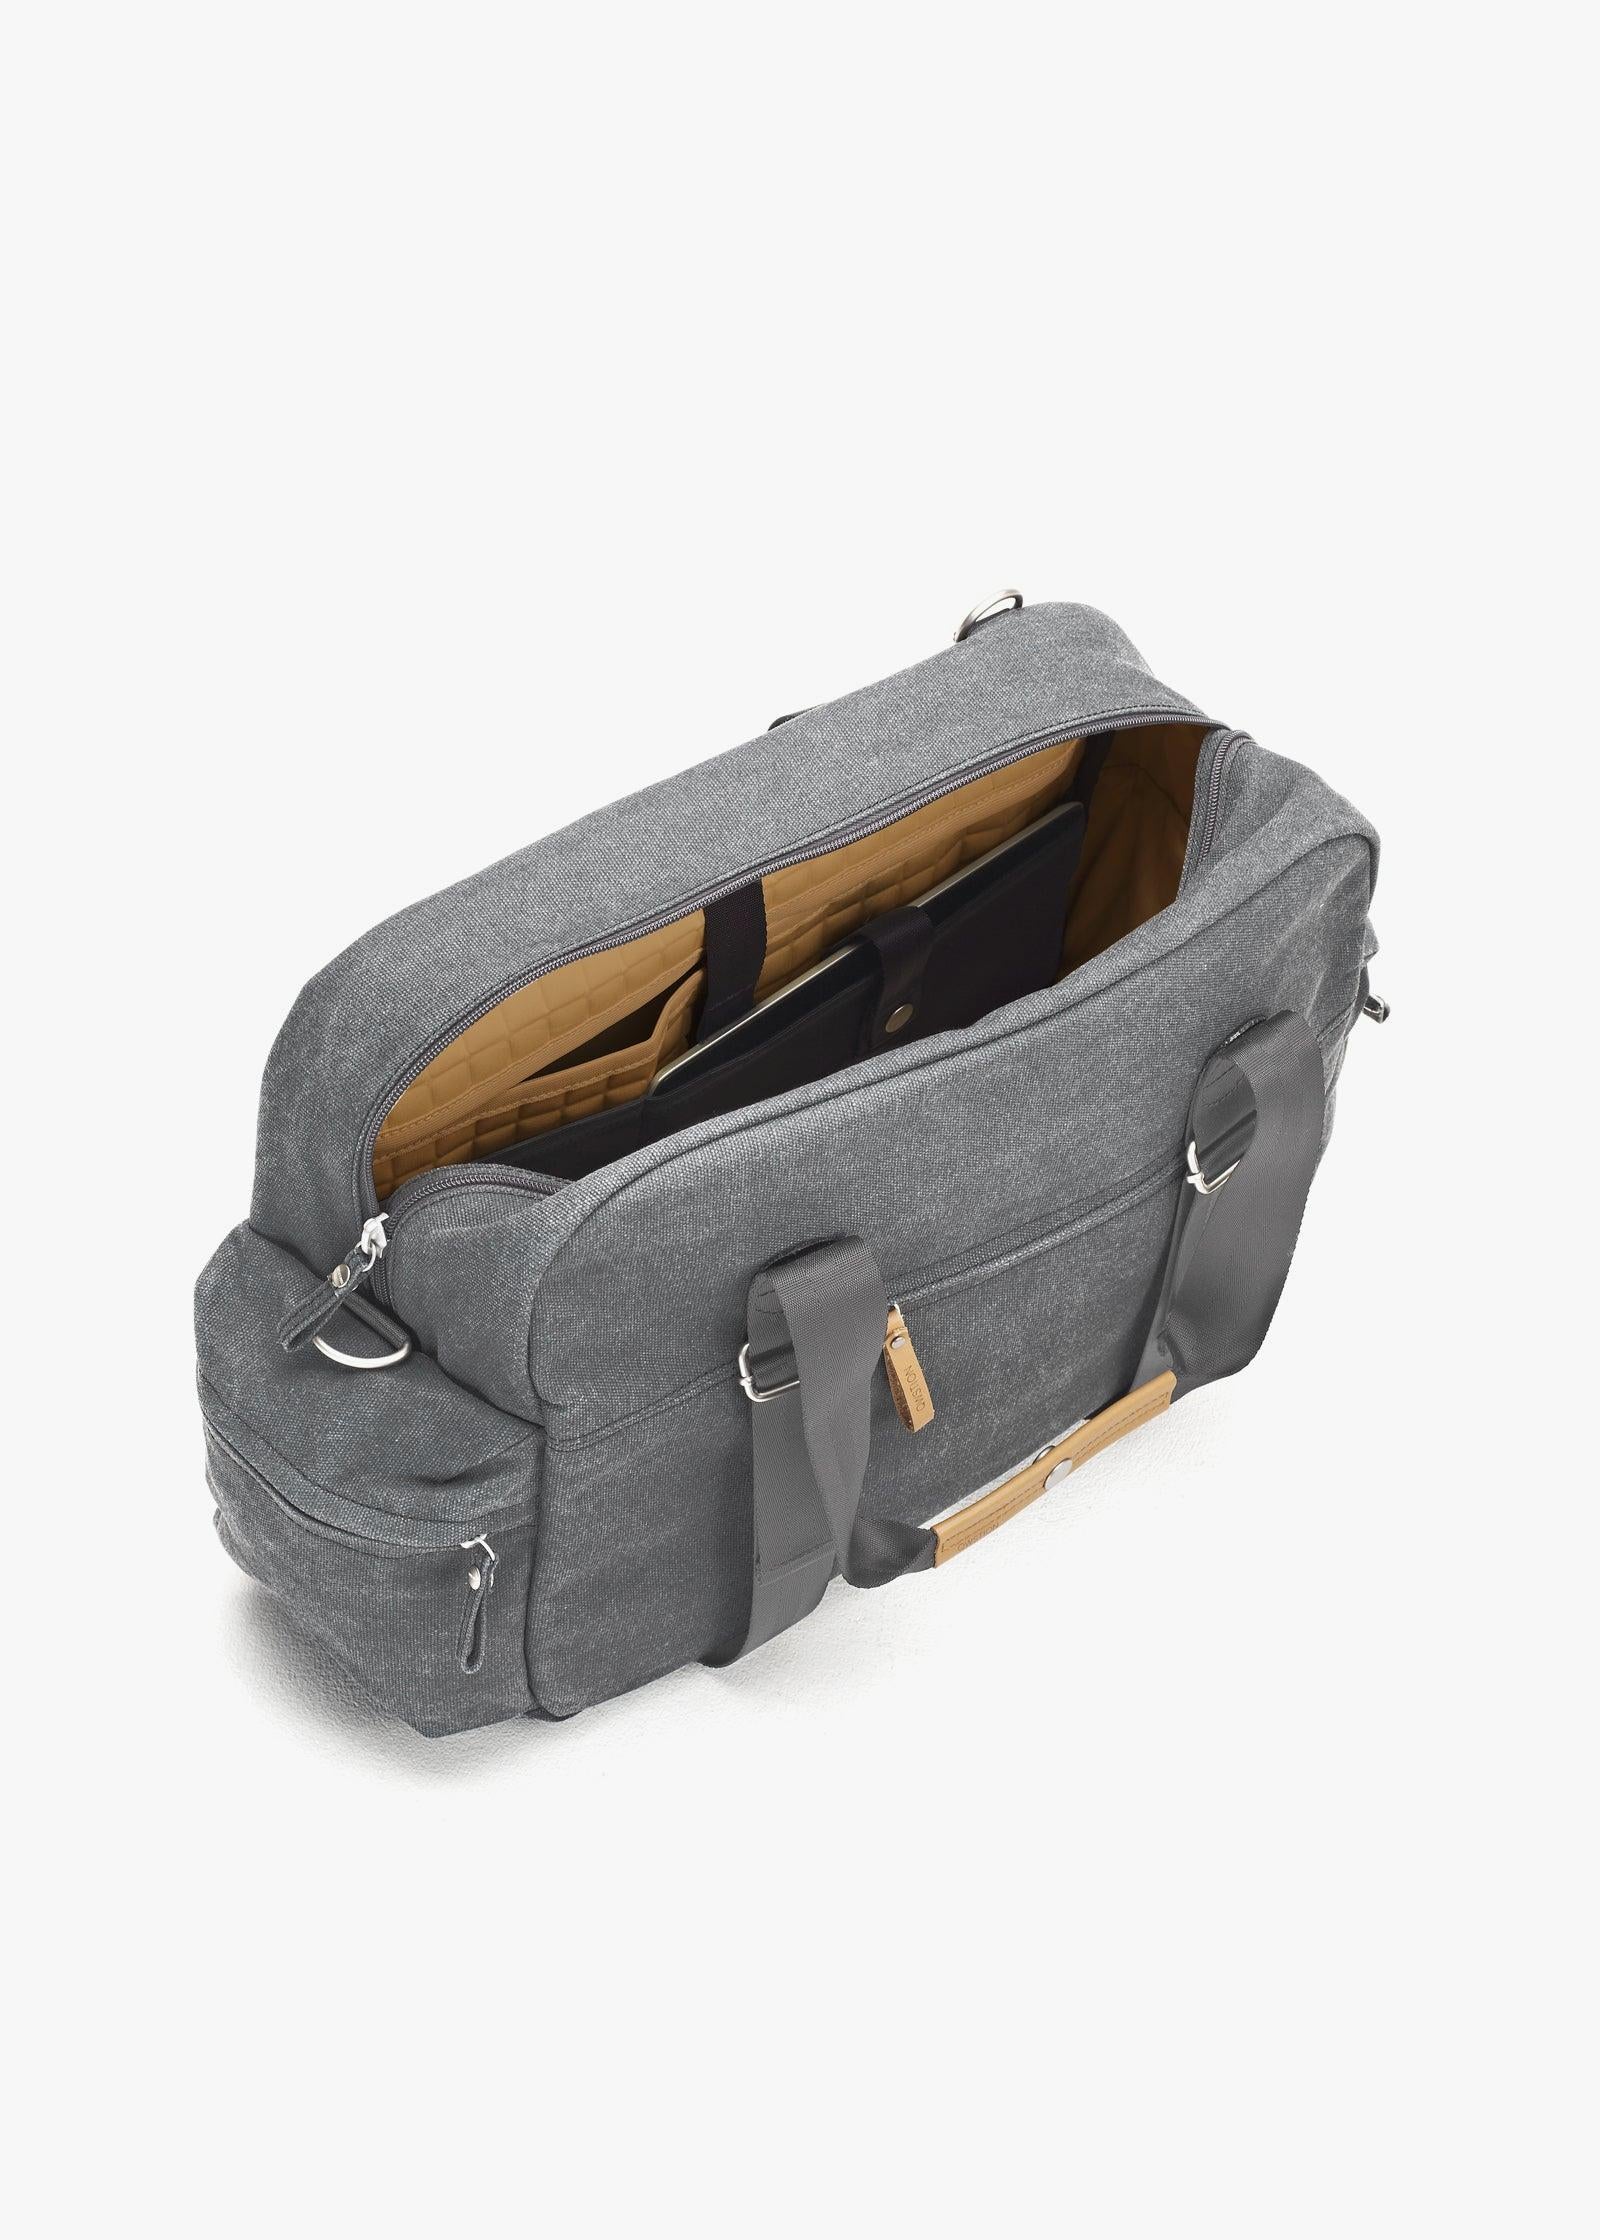 Overnighter – Washed Grey